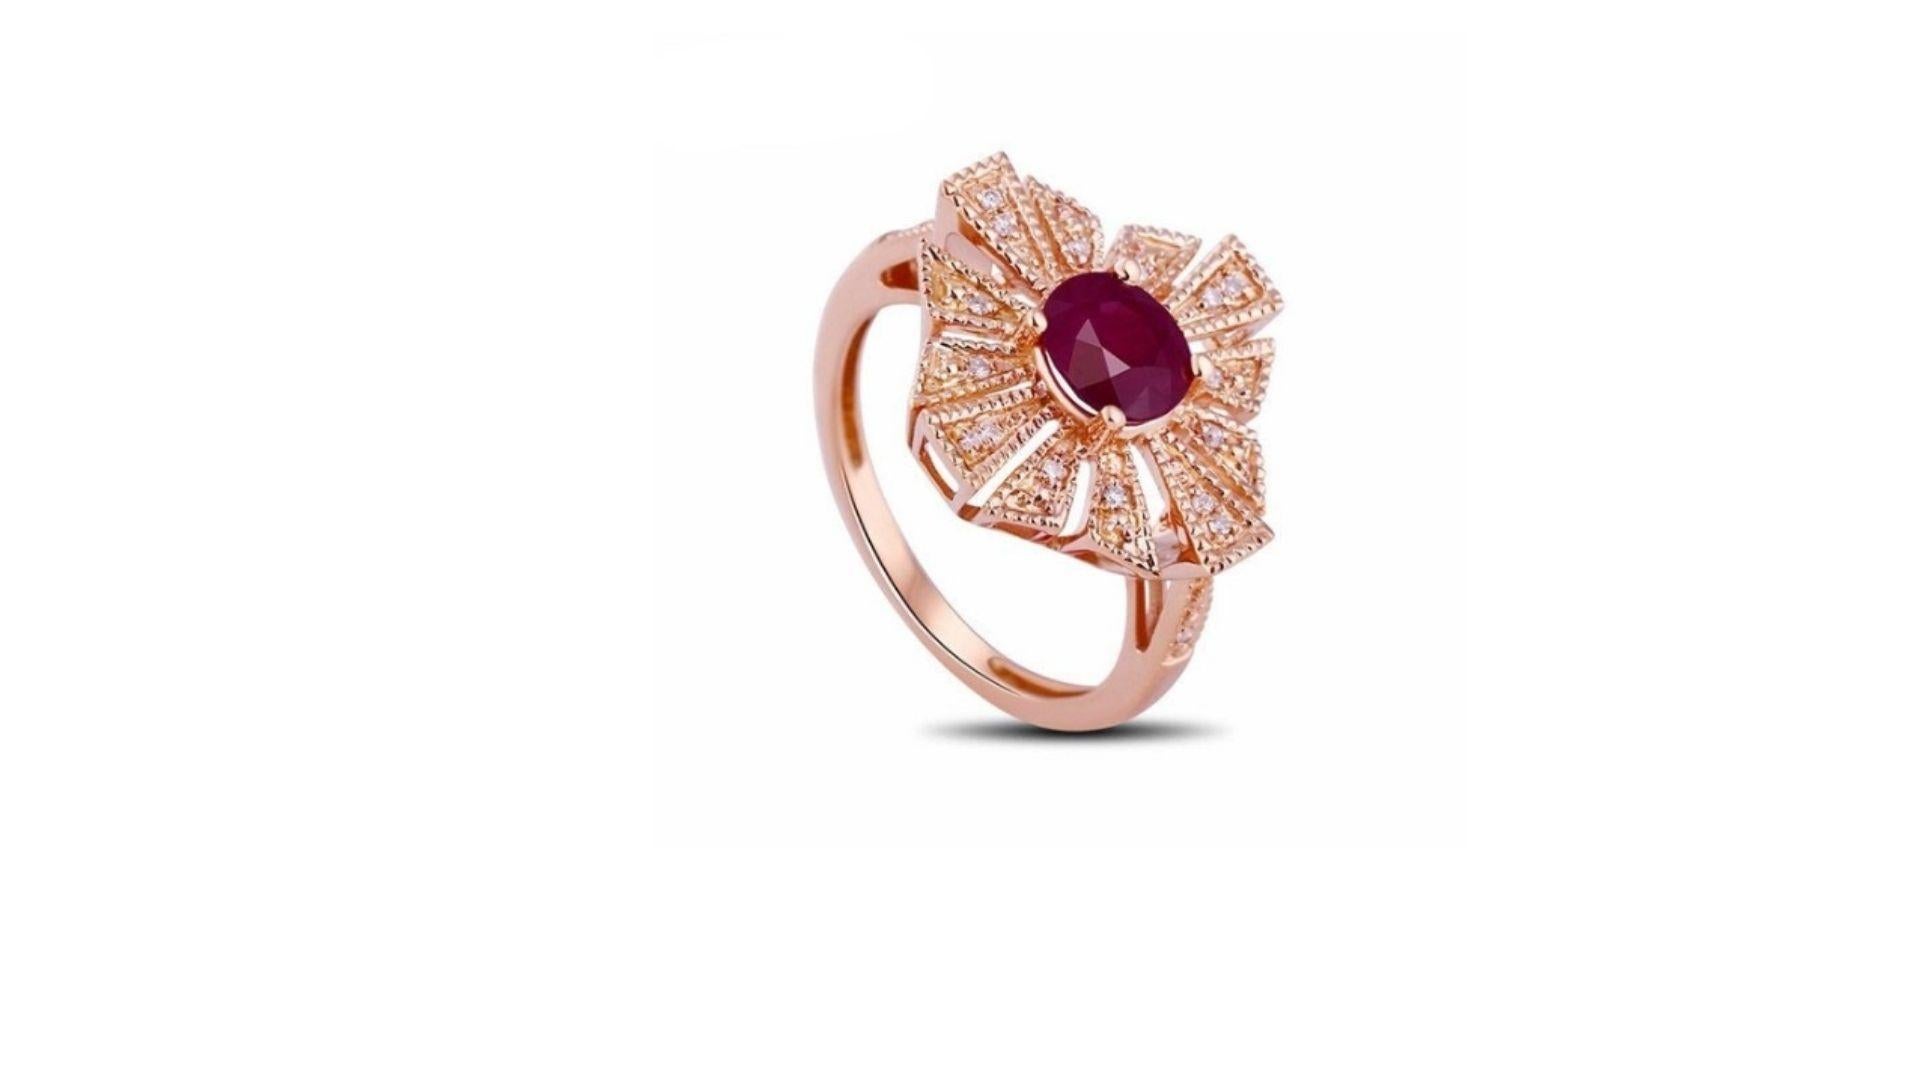 This is a unique Ruby ring  with 18 diamonds around the main stone.  Set in 14k rose gold which also makes this stand out.  You could have this is other stones too or in yellow gold or white.  If you want or are looking for anything specific do get